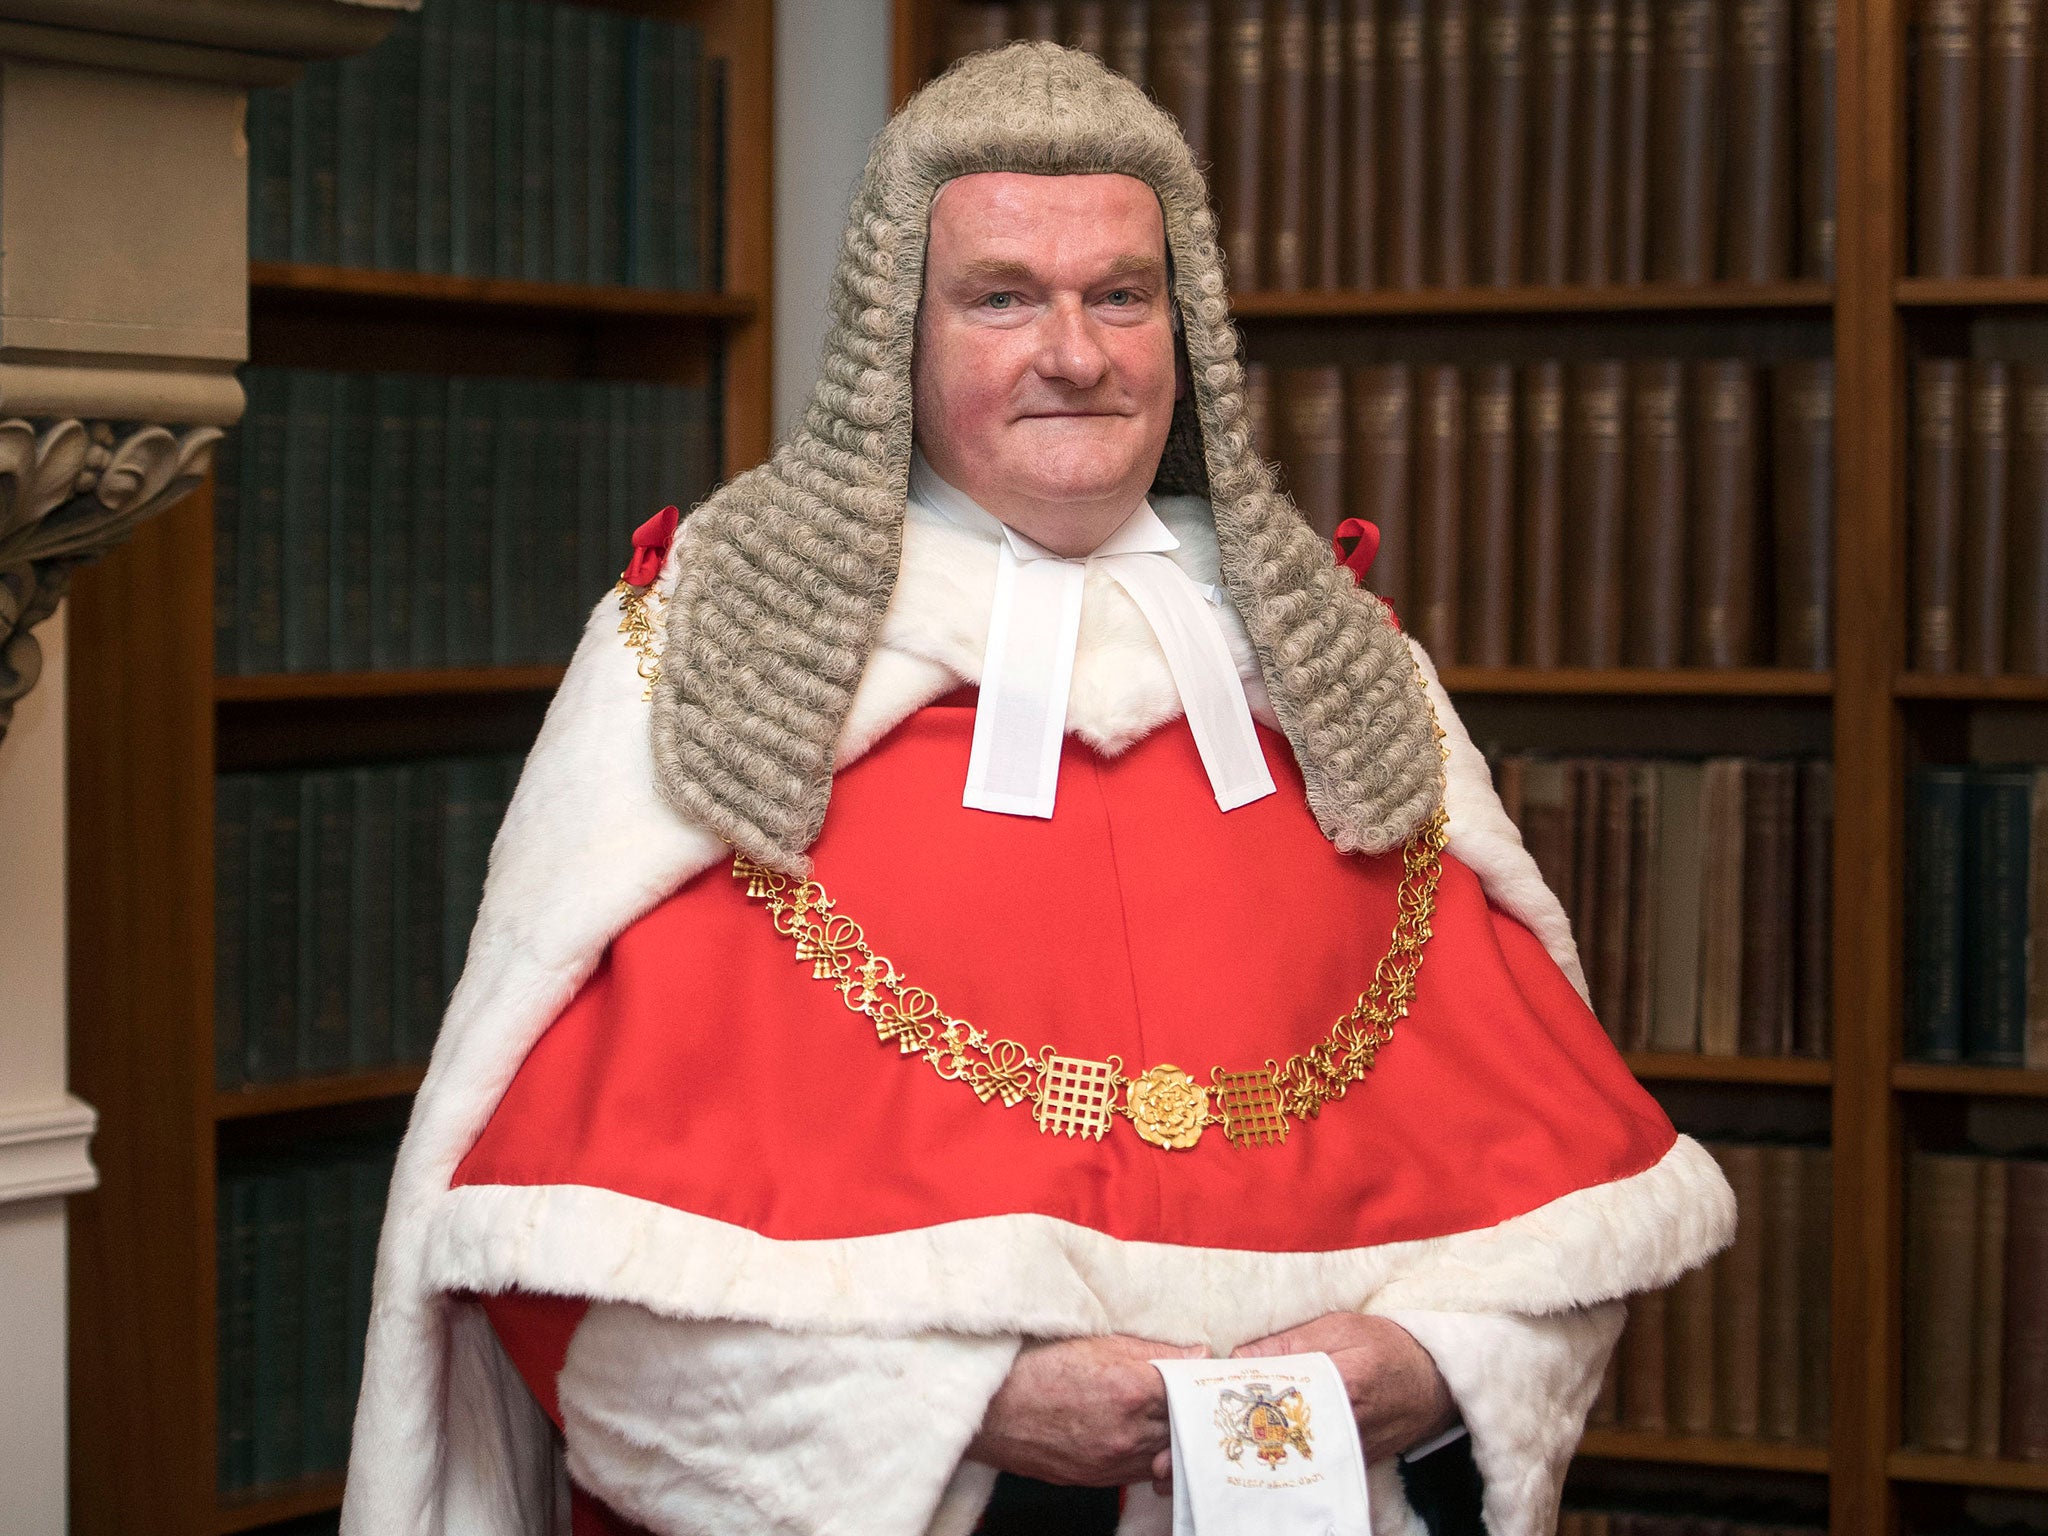 The Lord Chief Justice, Sir Ian Burnett, at the Royal Courts of Justice